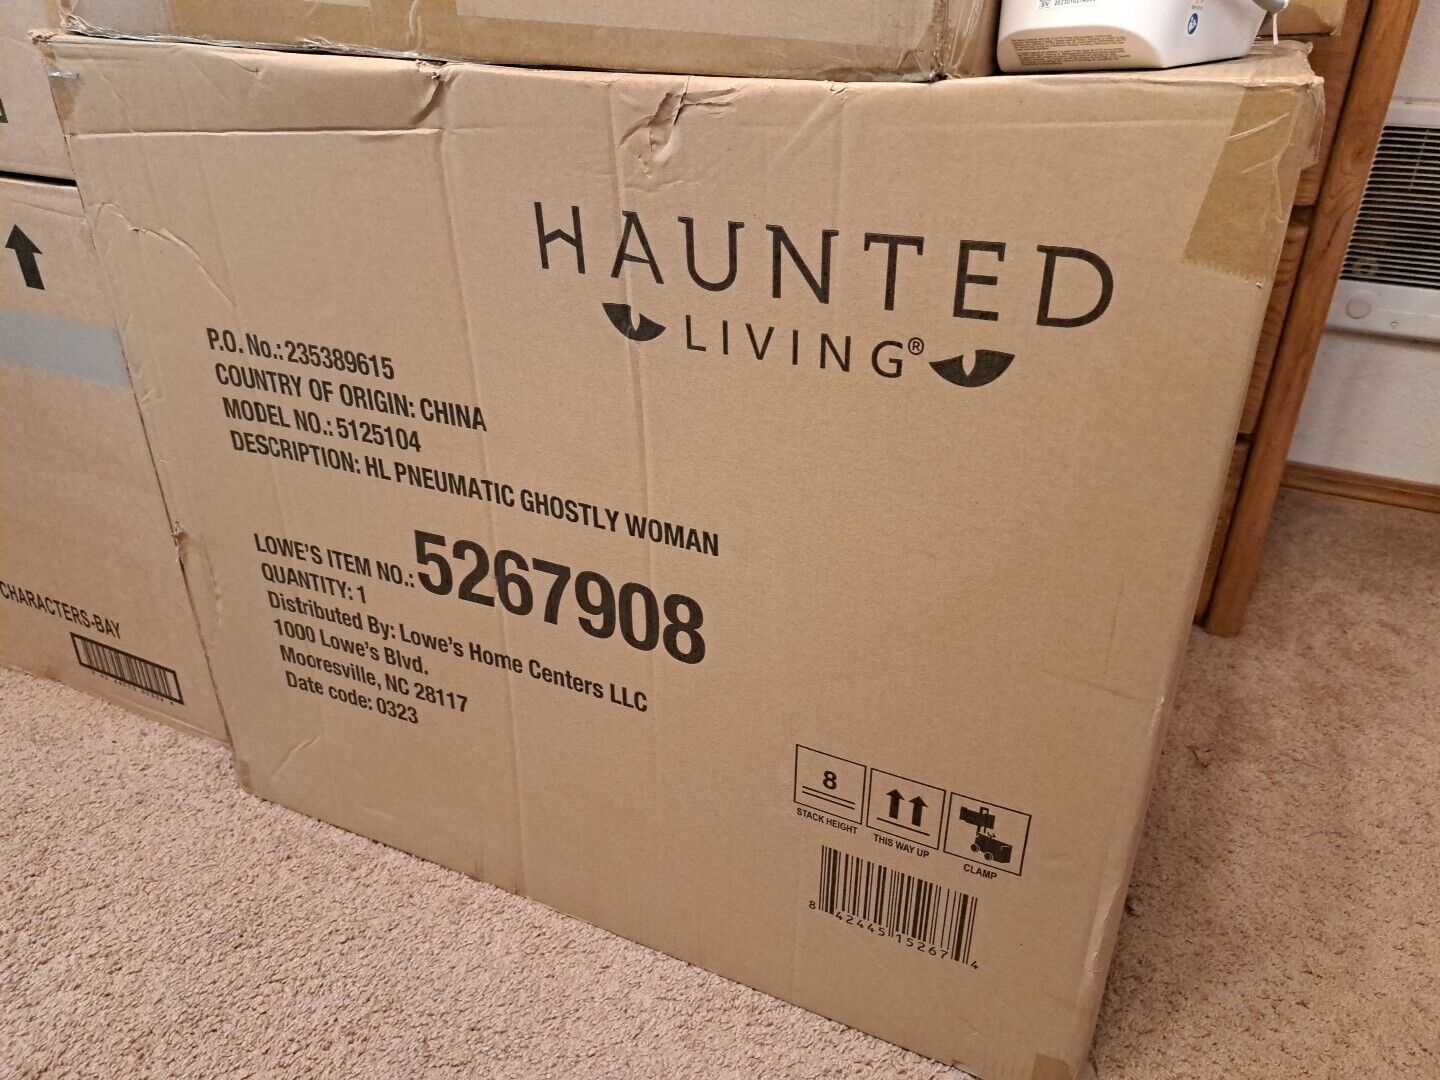 Haunted Living 5-ft Pneumatic Ghostly Woman